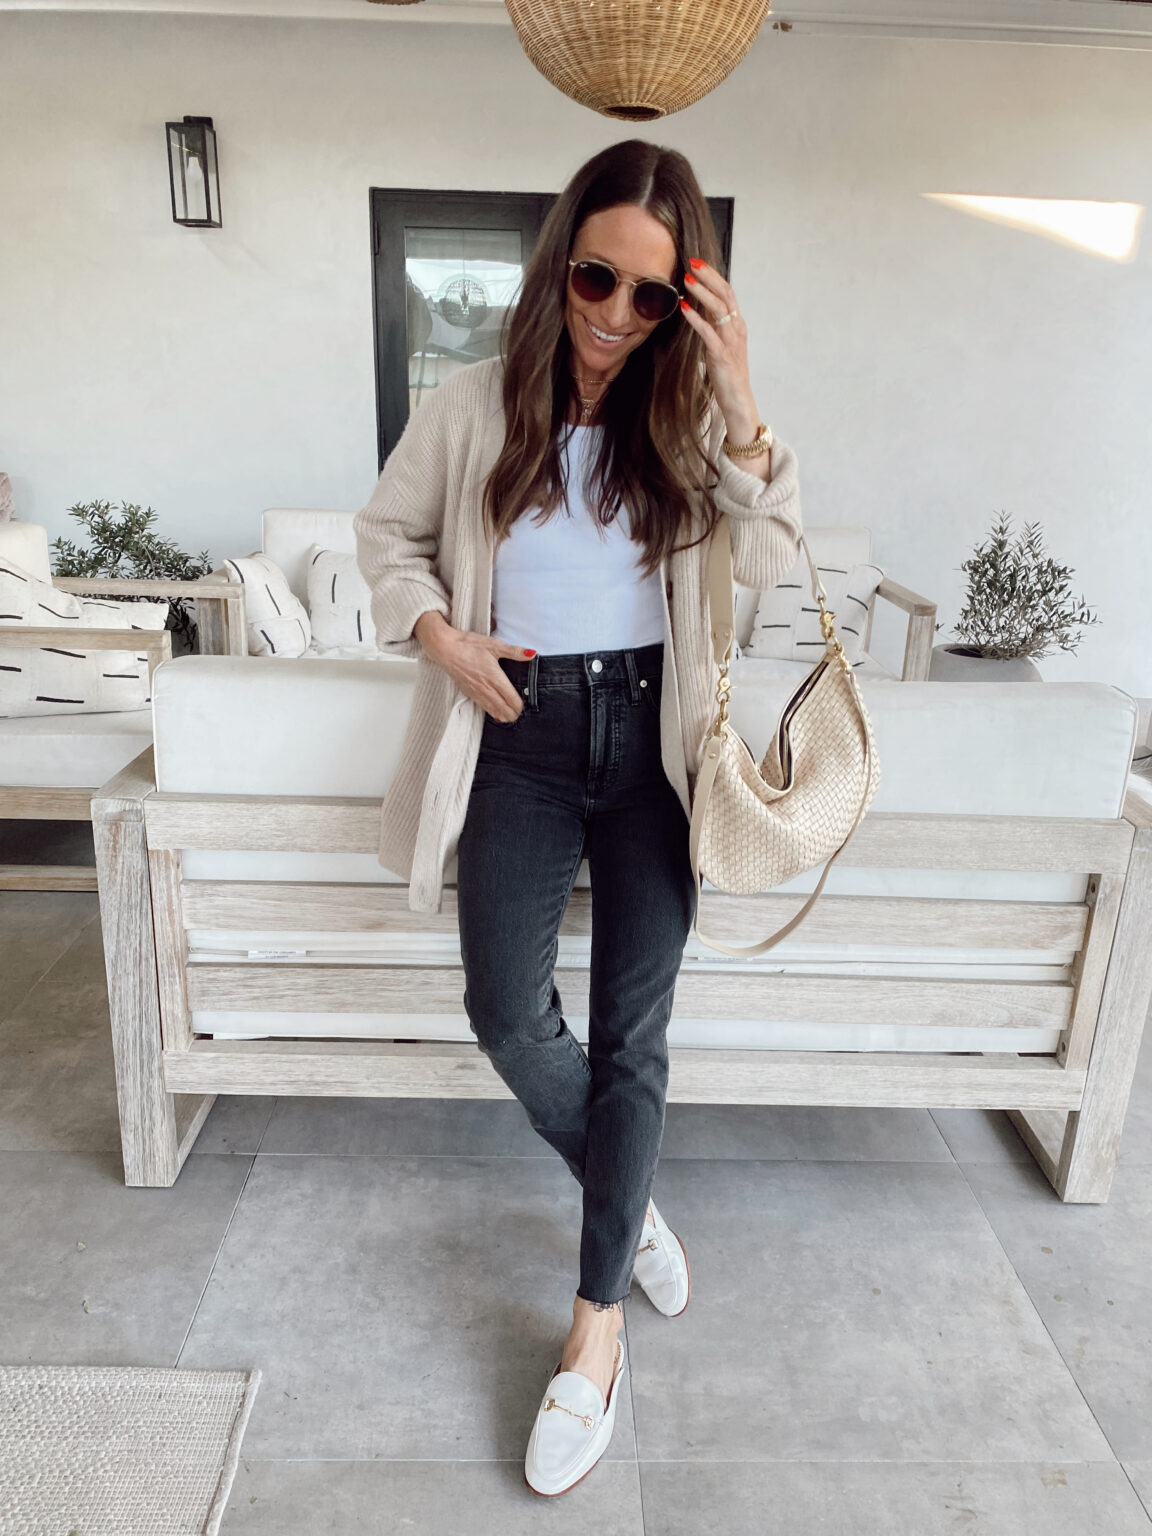 19 Styled Outfits From March's Capsule Wardrobe - posts from Shannon ...